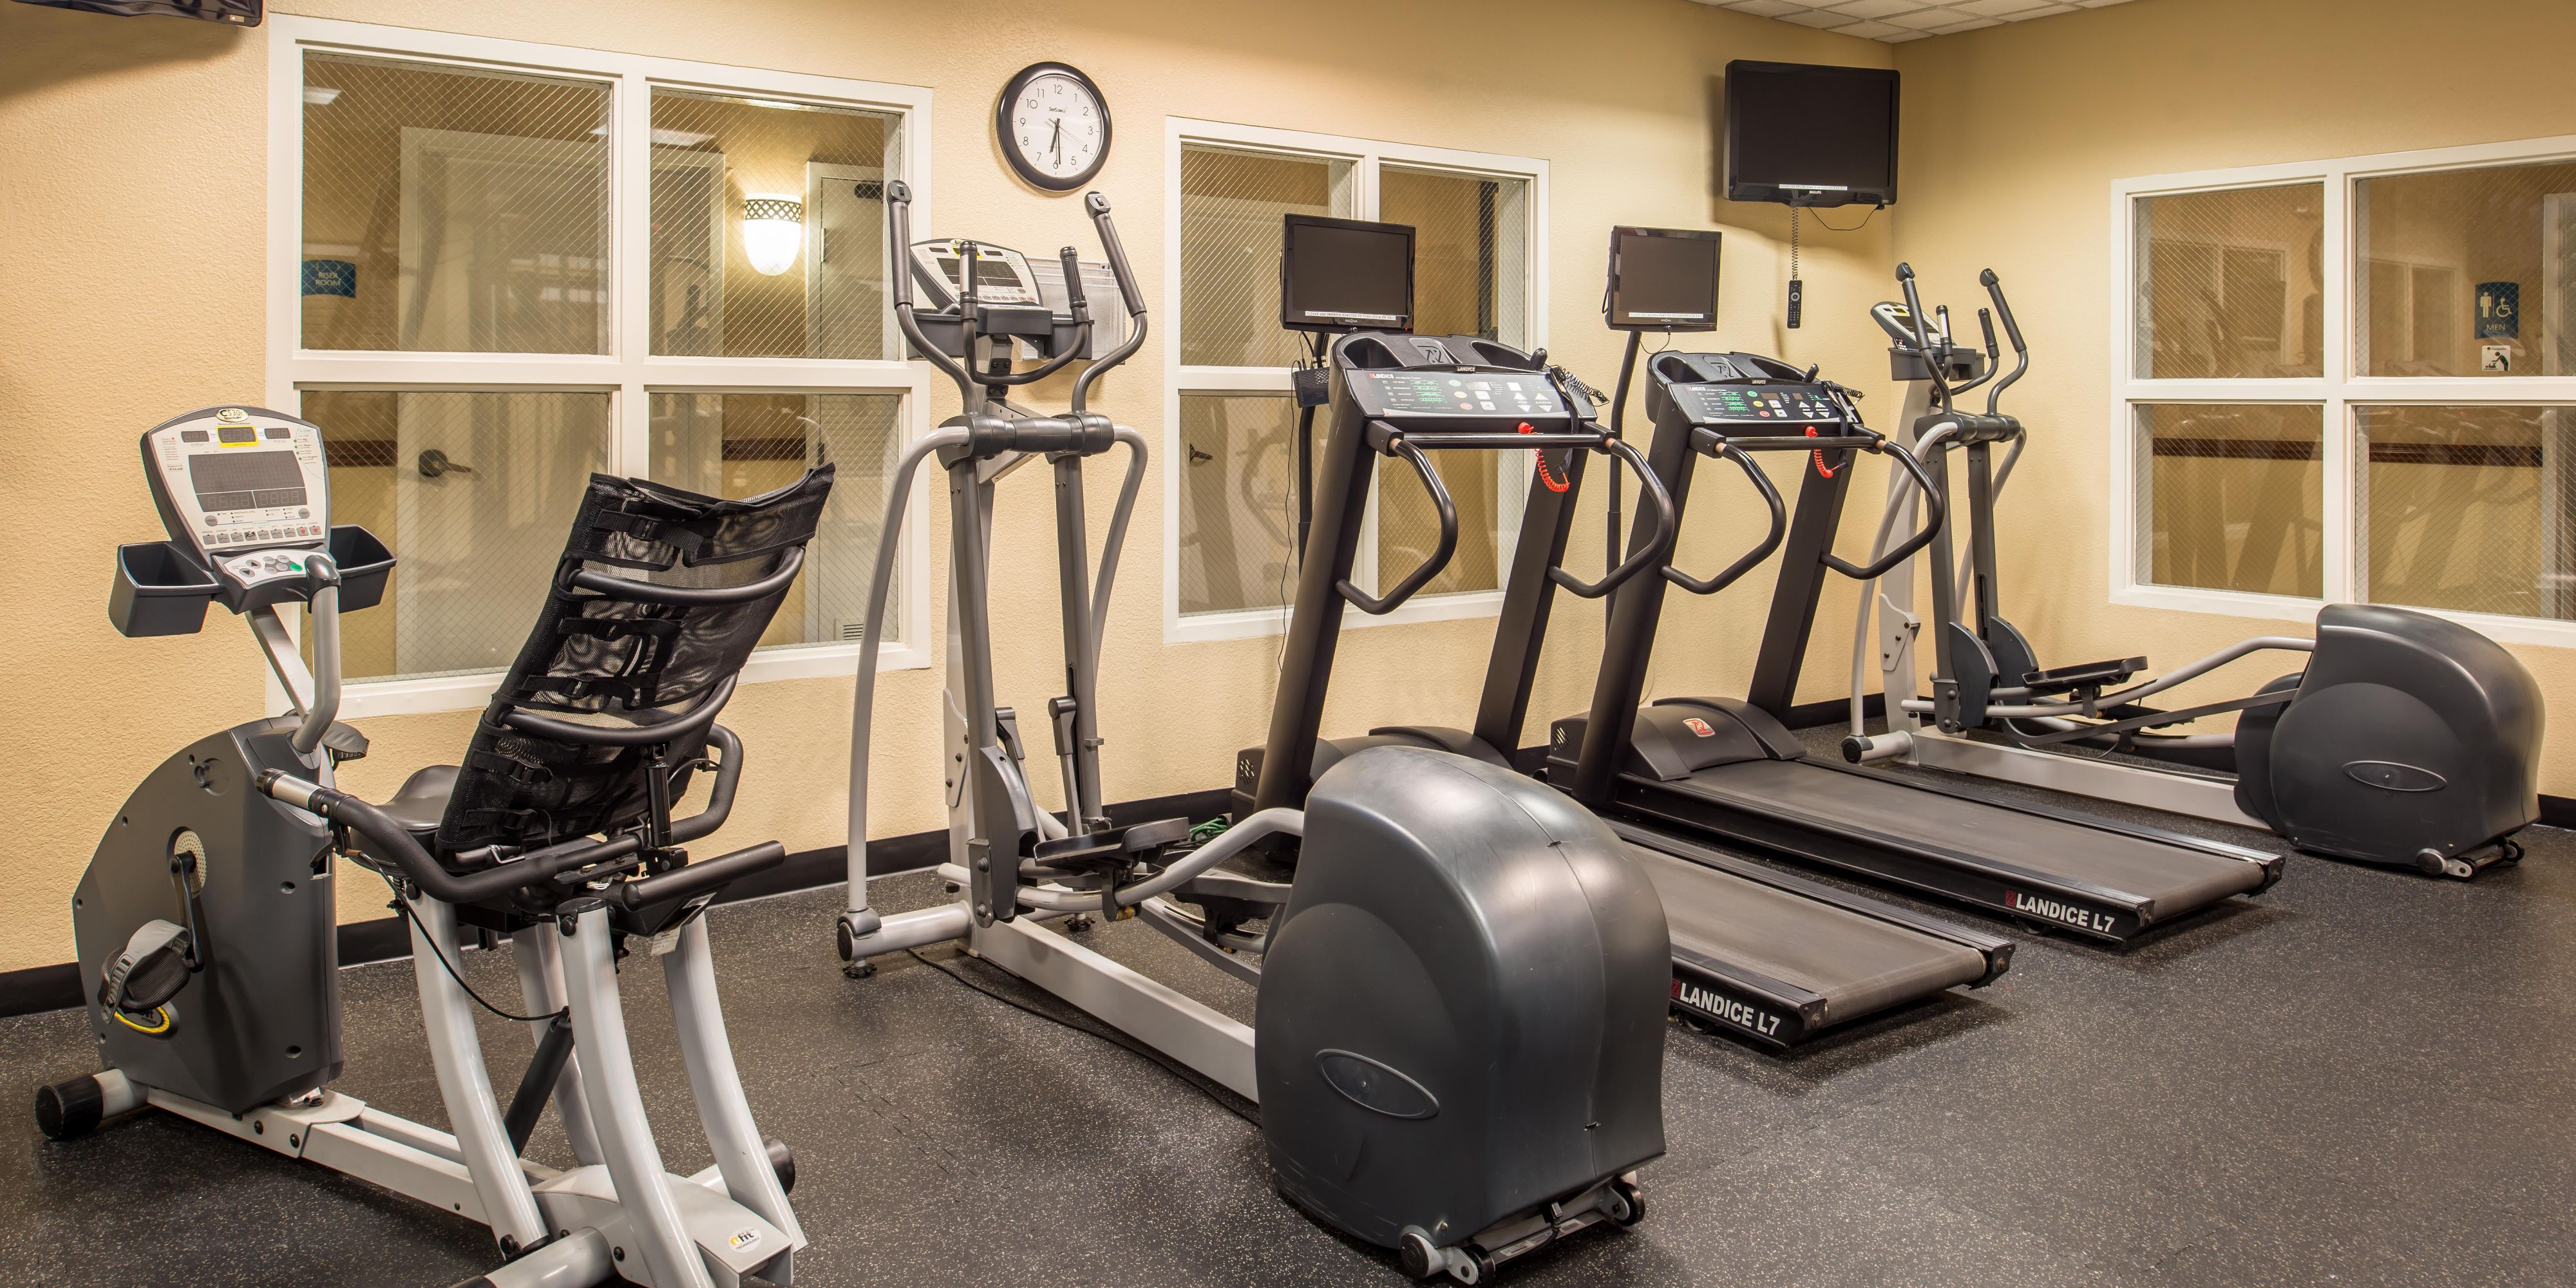 No need for a local gym with our 24-hour Fitness Center!